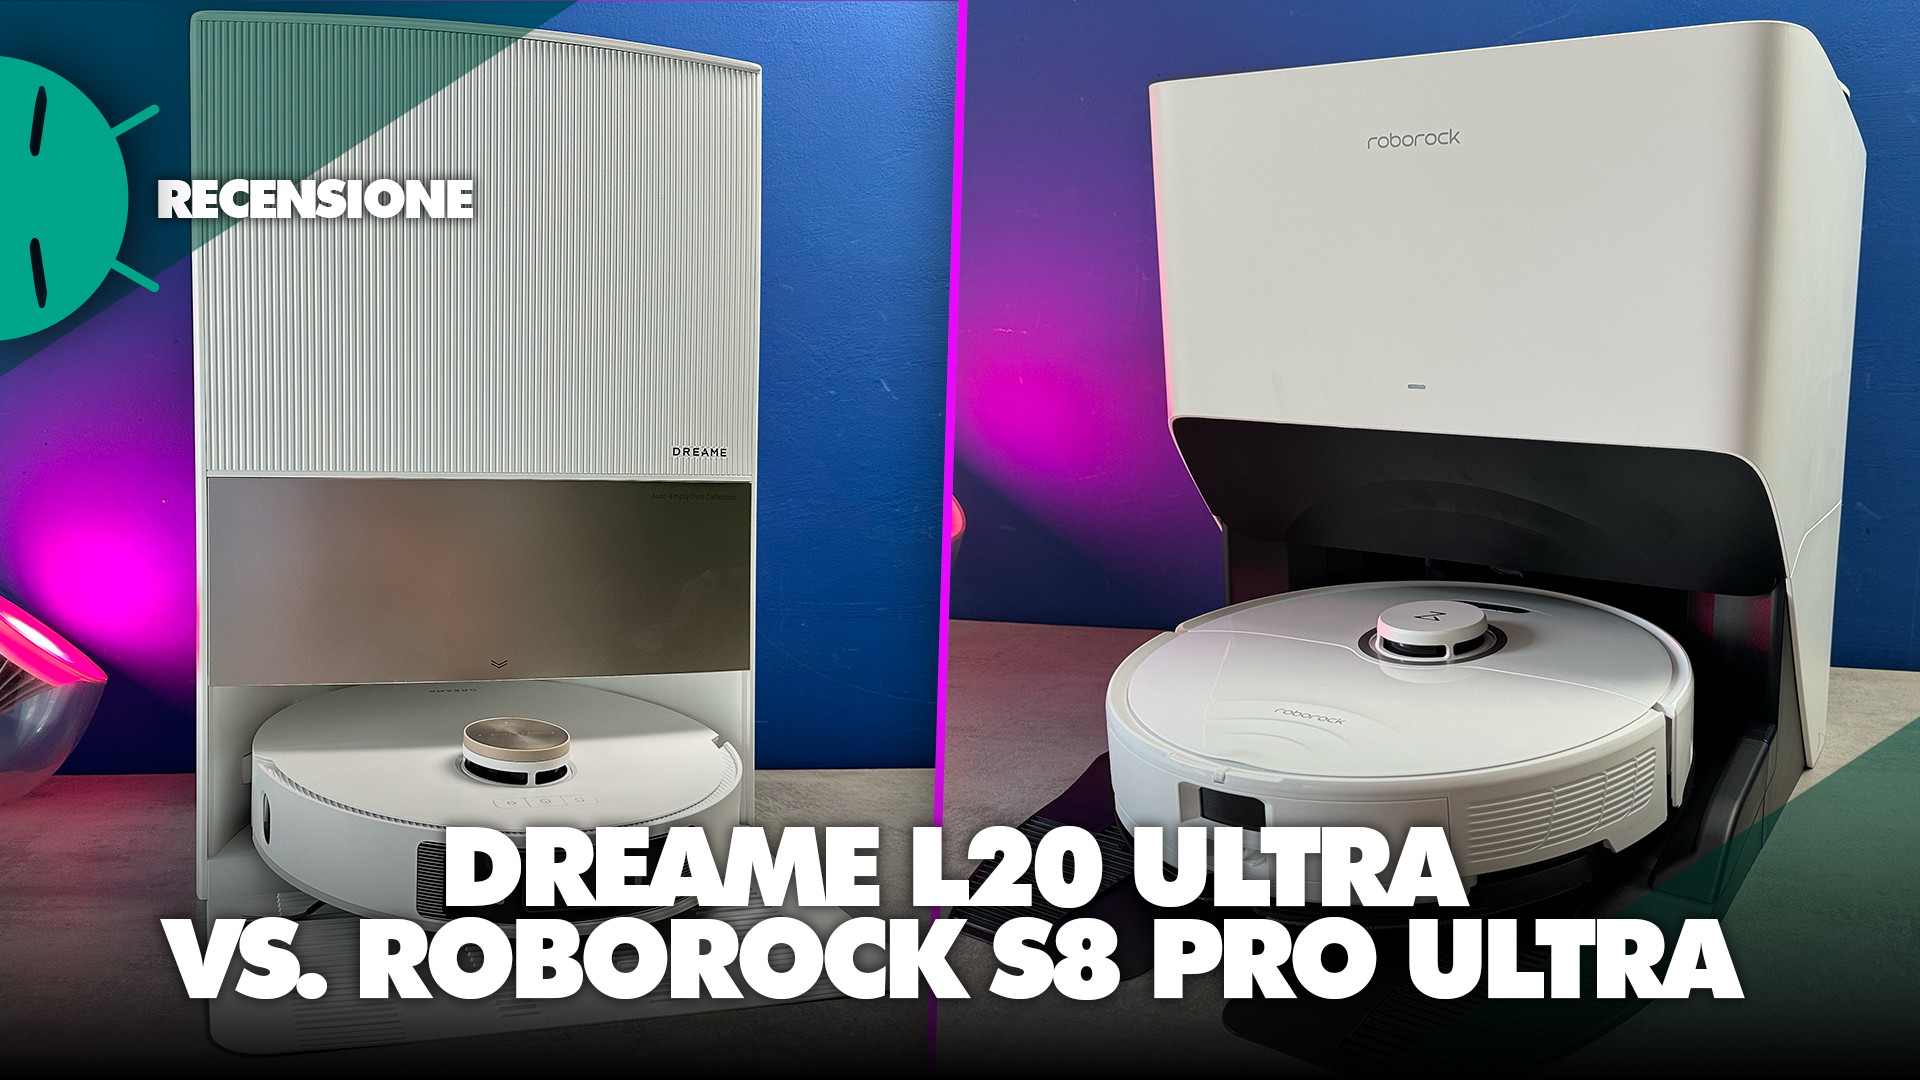 Dreame L20 Ultra vs. Roborock S8 Pro Ultra: what is the best robot